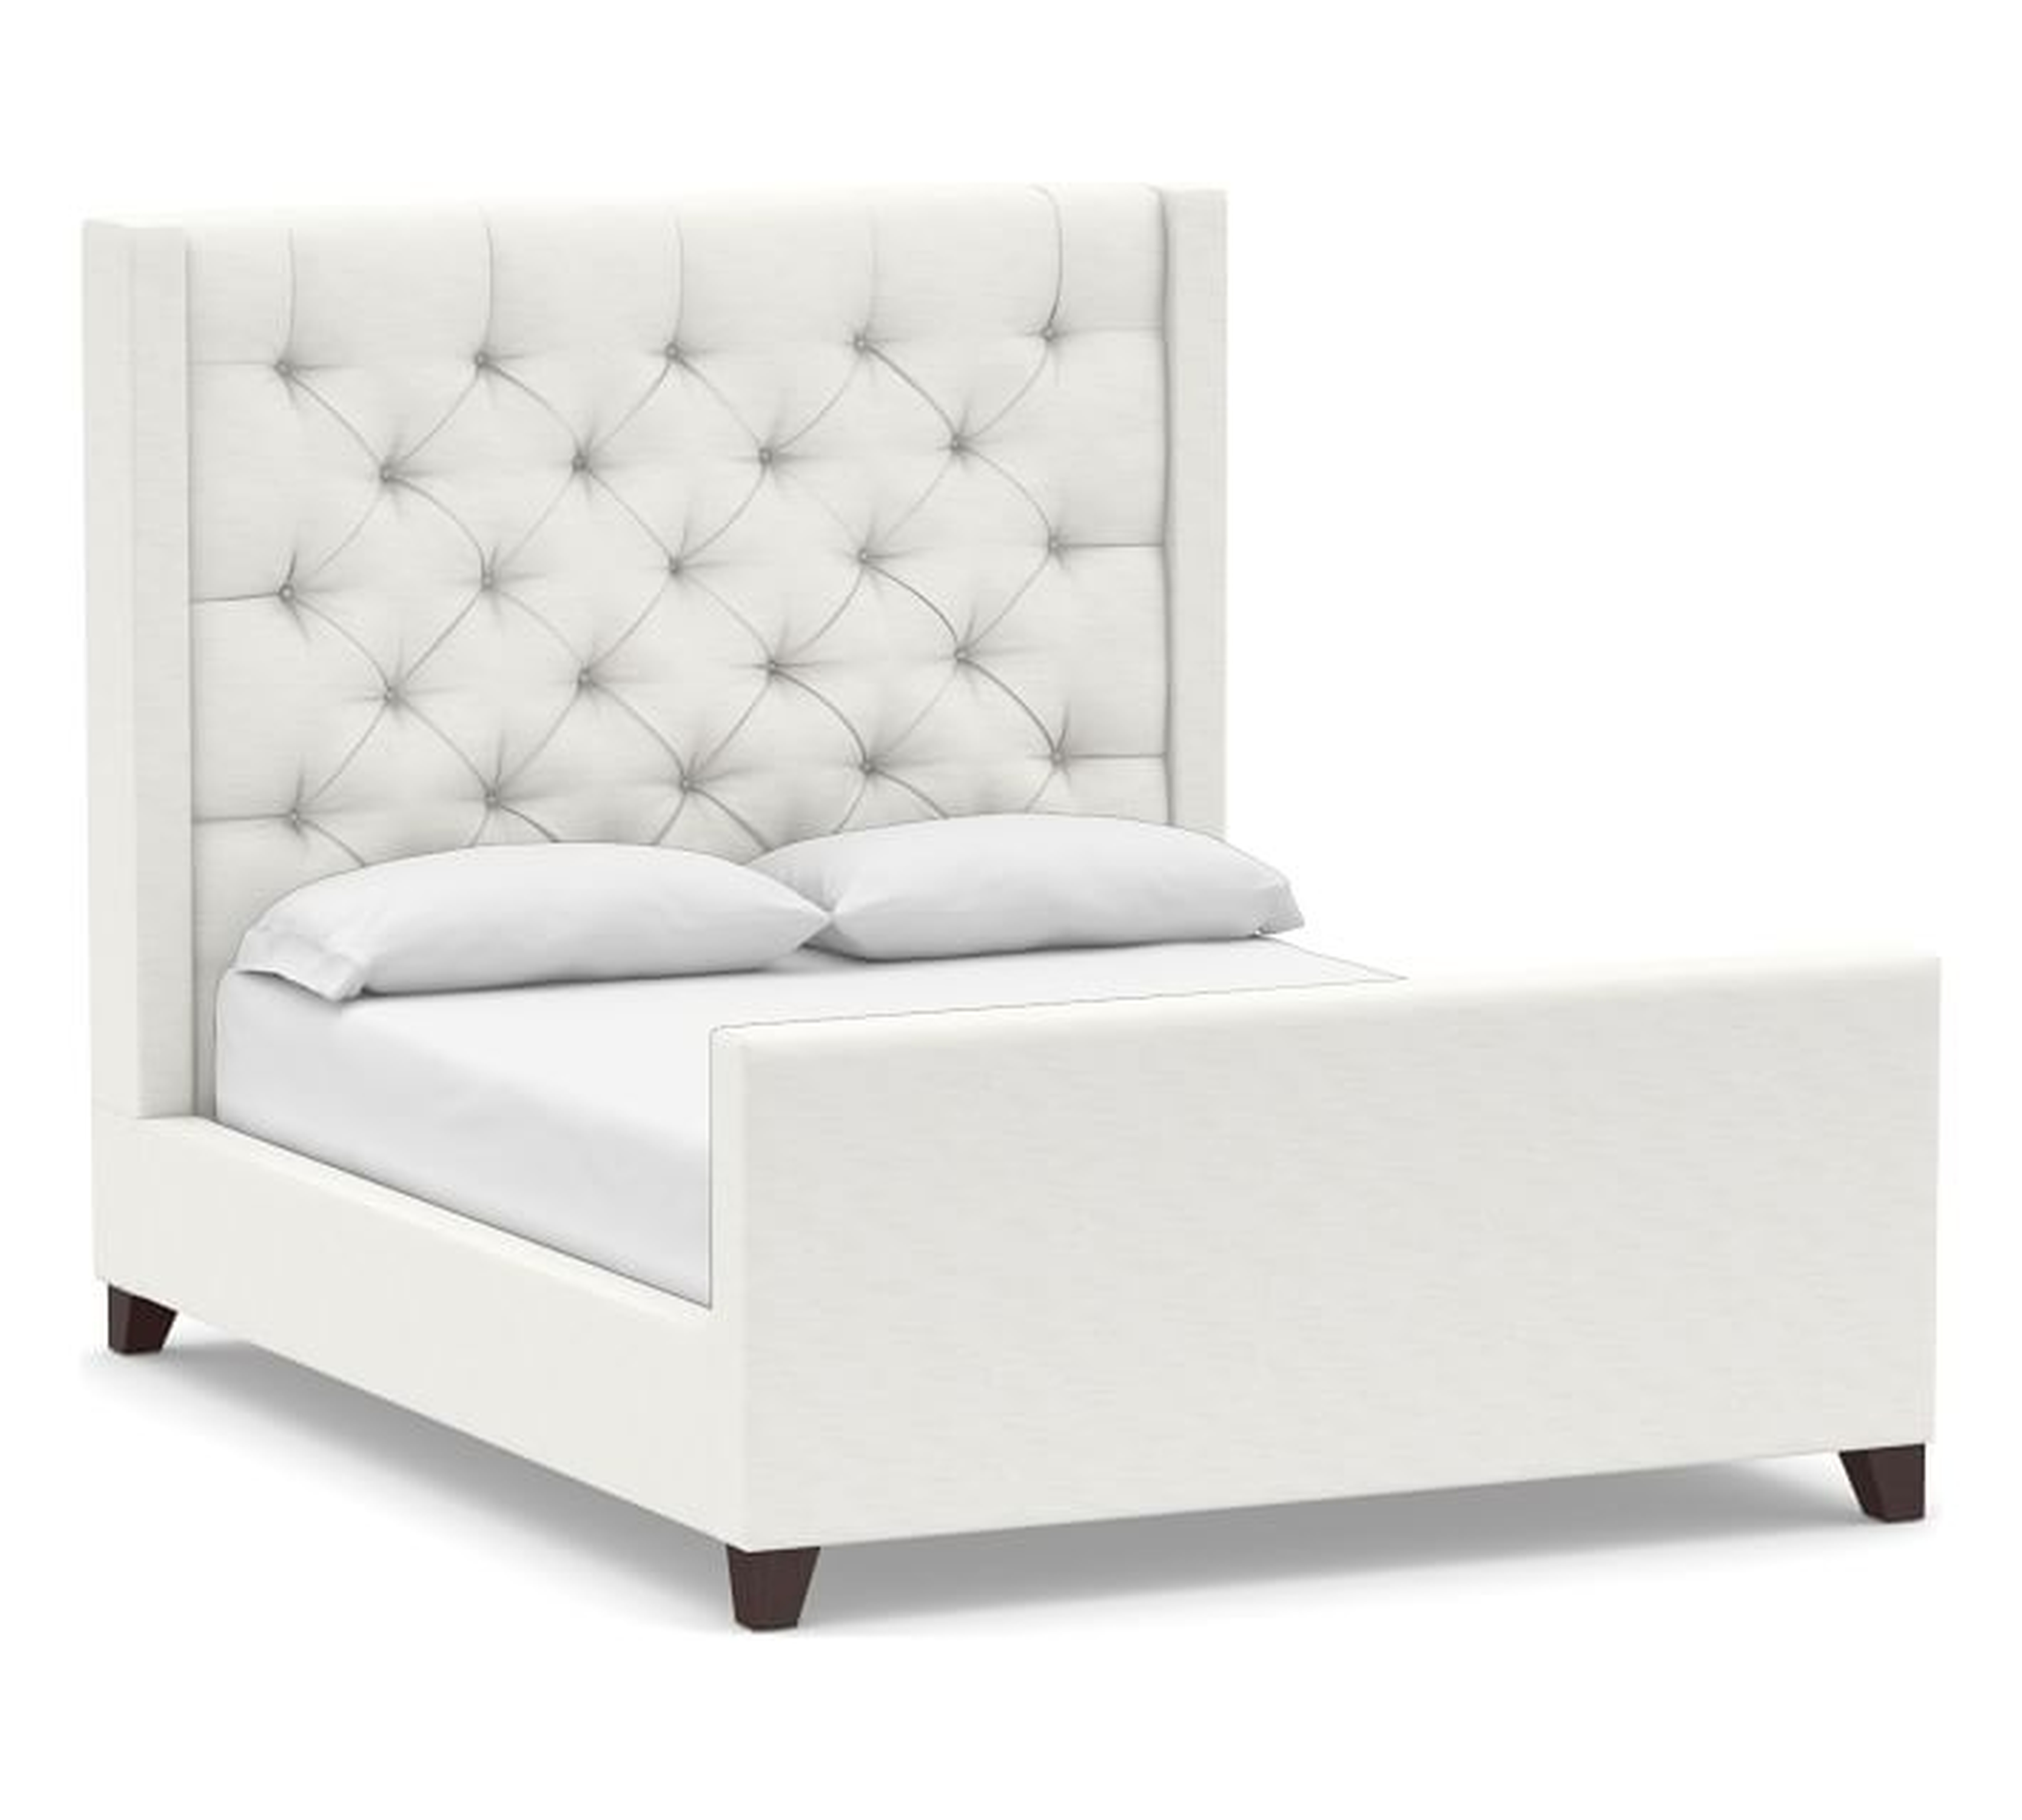 Harper Tufted Upholstered Bed &amp; Tall Footboard without Nailheads, King, Performance Slub Cotton White - Pottery Barn